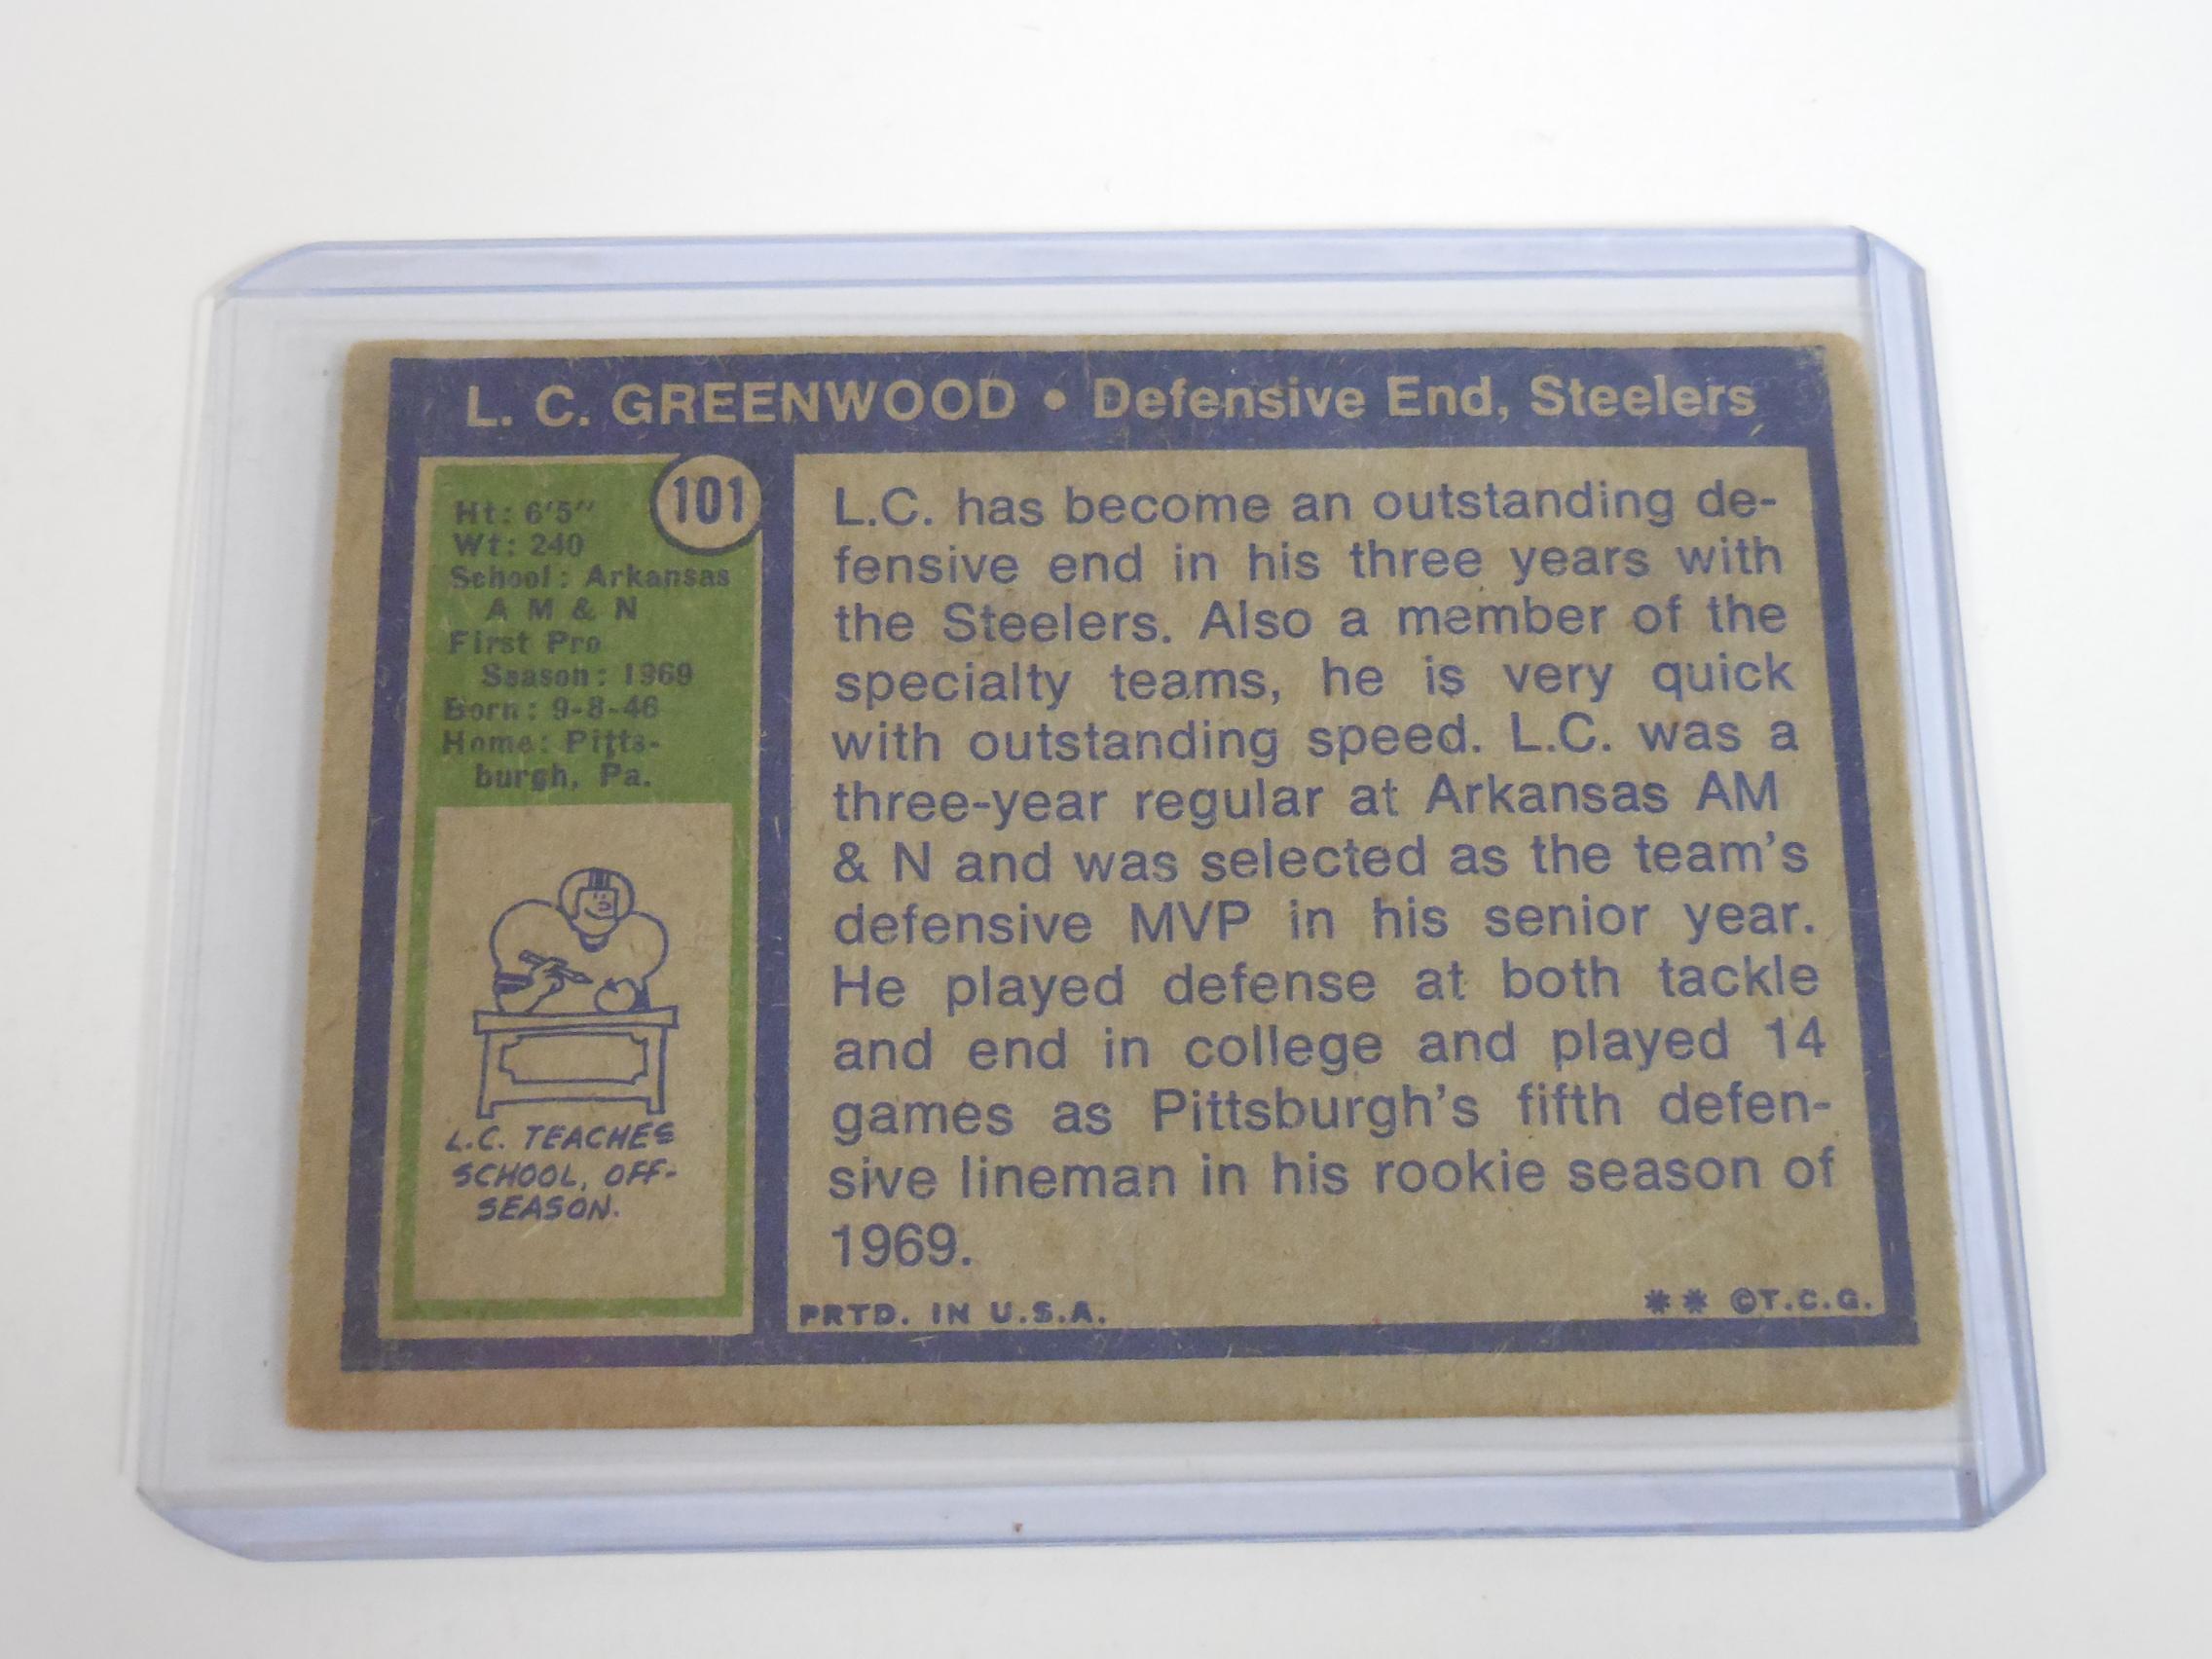 1972 TOPPS FOOTBALL #101 L.C. GREENWOOD STEELERS ROOKIE CARD RC